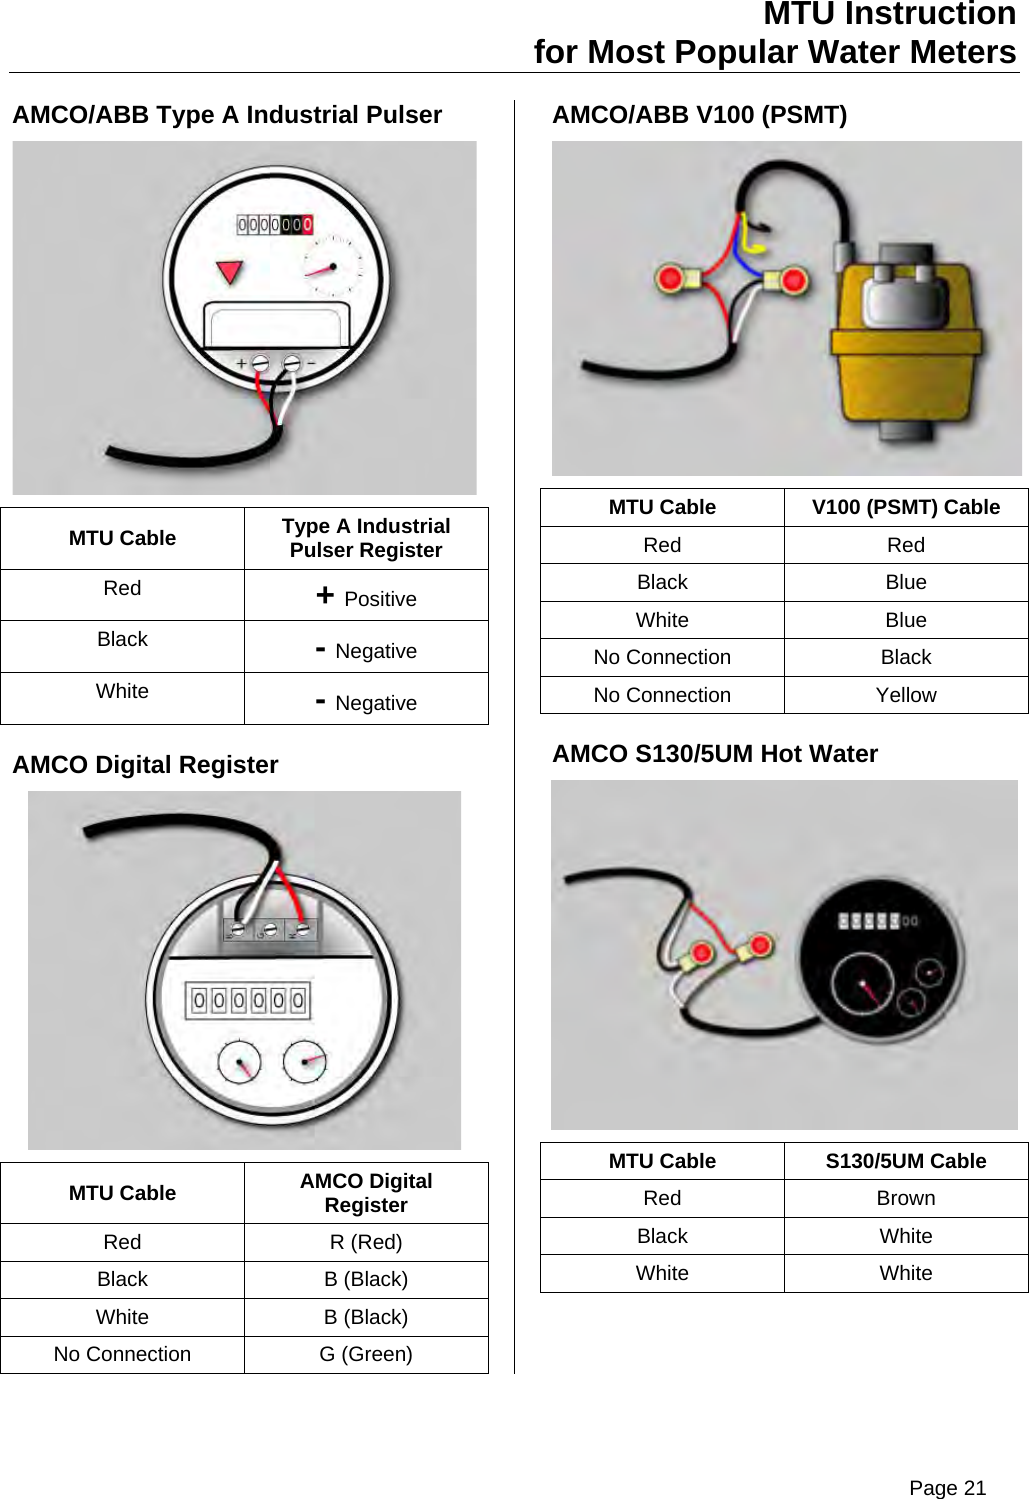 MTU Instruction for Most Popular Water Meters AMCO/ABB Type A Industrial Pulser  MTU Cable  Type A Industrial Pulser Register Red  + Positive Black  - Negative White  - Negative AMCO Digital Register  MTU Cable  AMCO Digital Register Red R (Red) Black B (Black) White B (Black) No Connection  G (Green) AMCO/ABB V100 (PSMT)  MTU Cable  V100 (PSMT) Cable Red Red Black Blue White Blue No Connection  Black No Connection  Yellow AMCO S130/5UM Hot Water  MTU Cable  S130/5UM Cable Red Brown Black White White White  Page 21